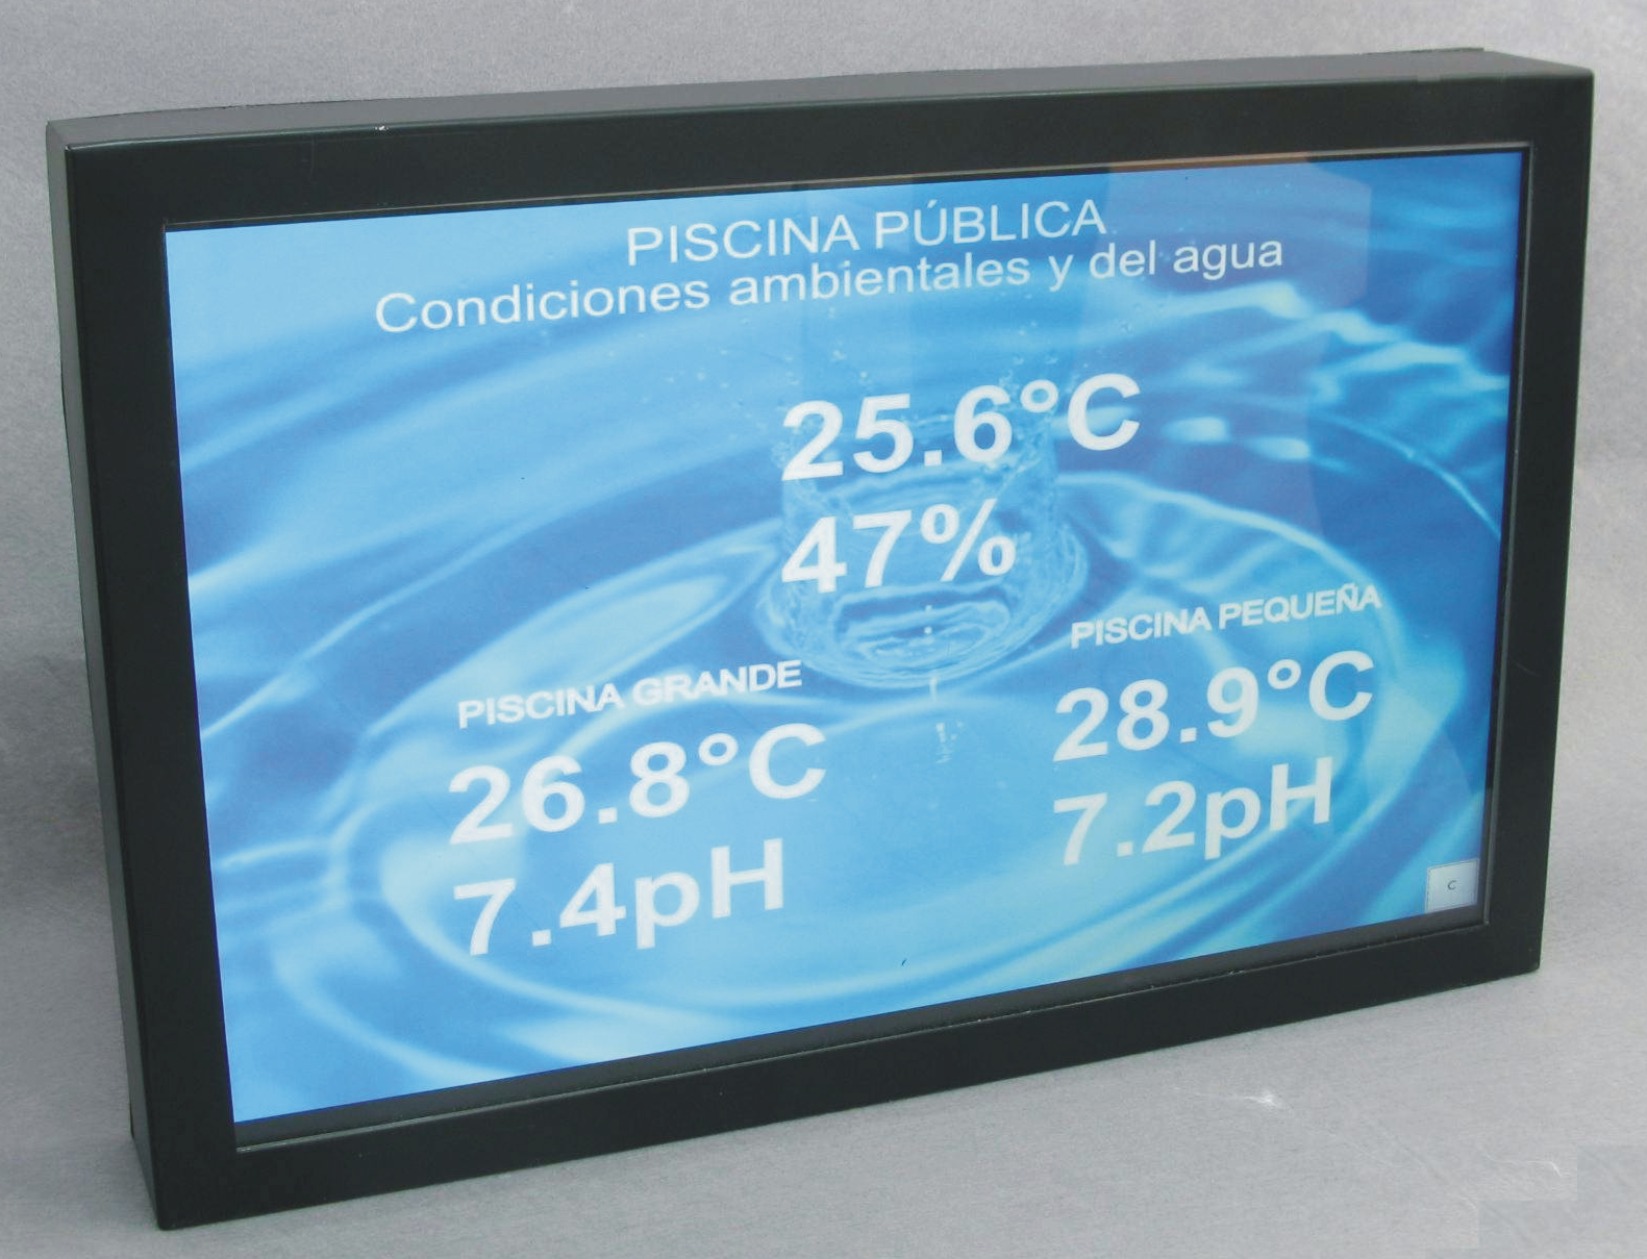 Temperature and humidity large display TFT/LCD/LED screen indicator for pools. RITE.